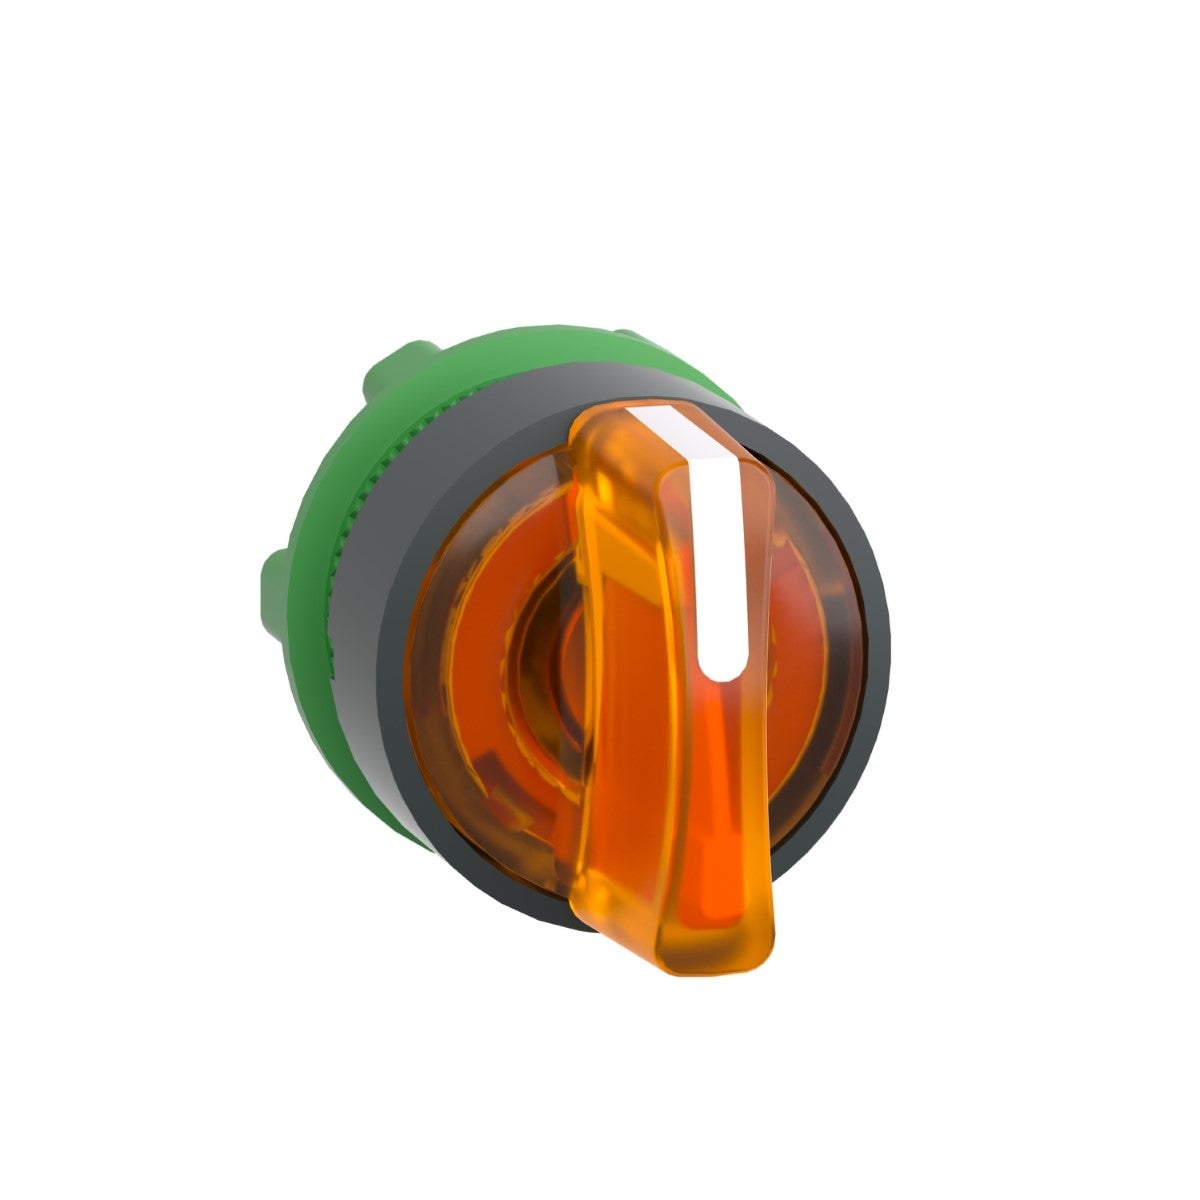 Head for illuminated selector switch, Harmony XB5, plastic, orange handle, 22mm, universal LED, 3 positions, left to center